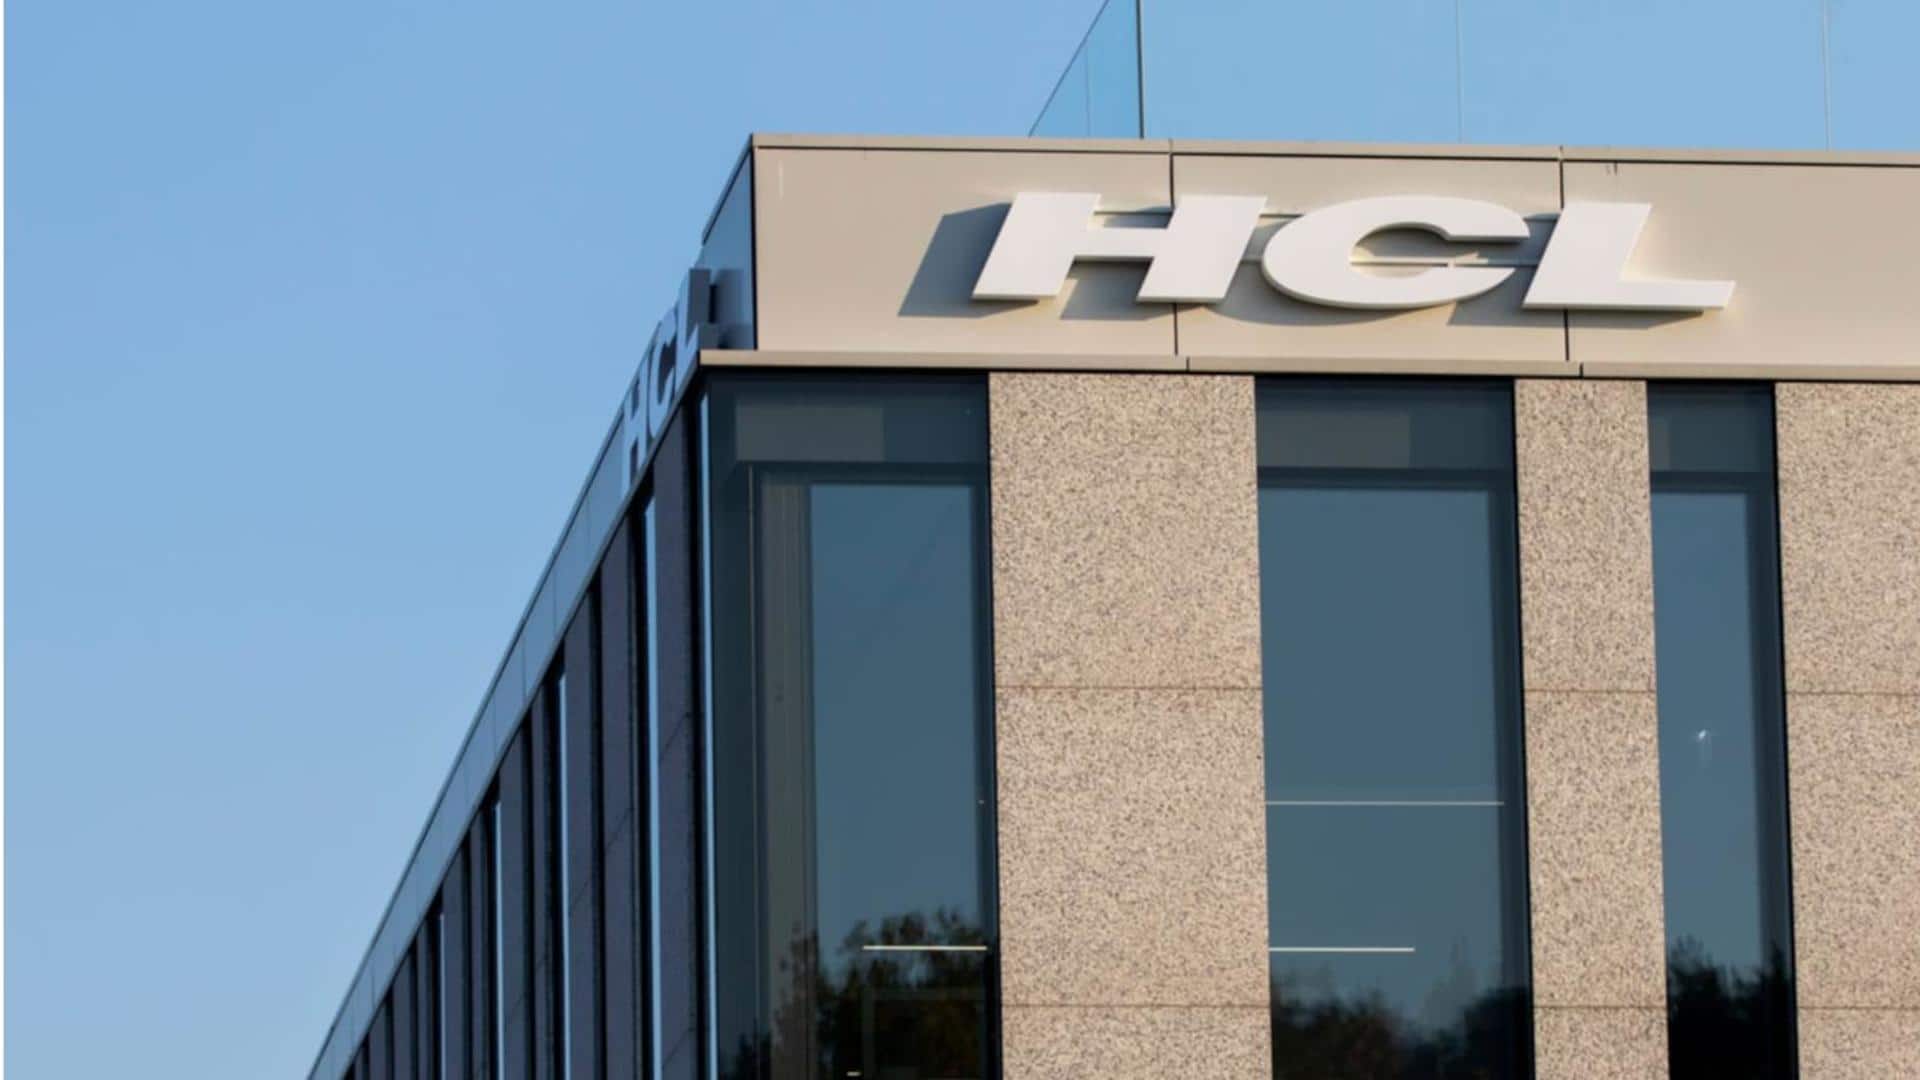 HCL Q3 results: Profit rises 19% year-over-year to Rs. 4,096cr